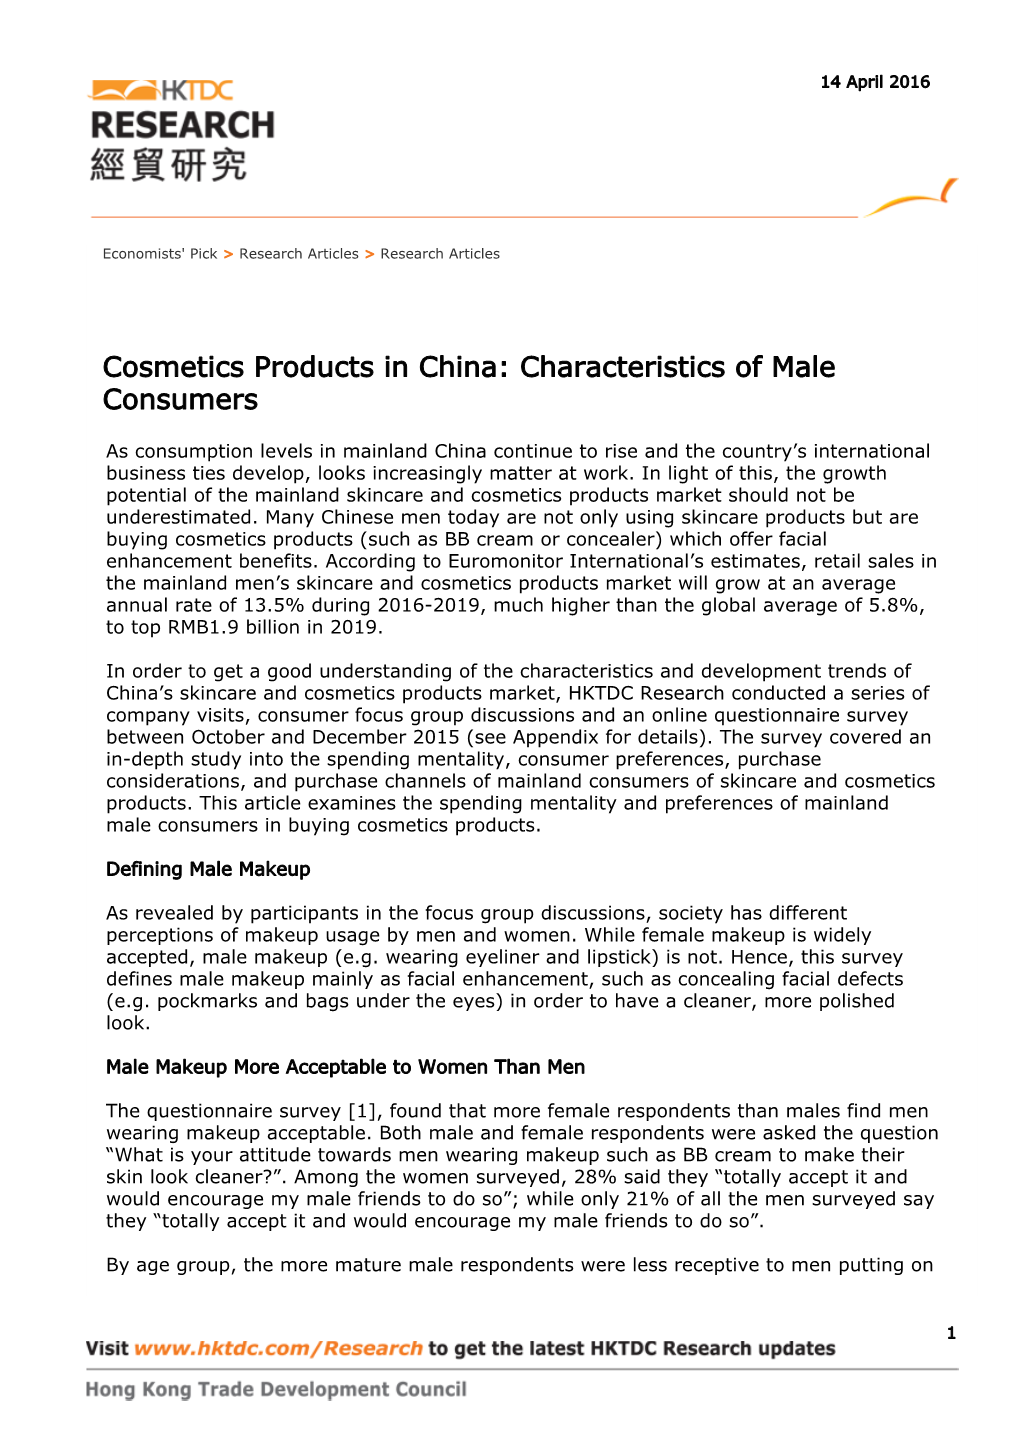 Cosmetics Products in China: Characteristics of Male Consumers